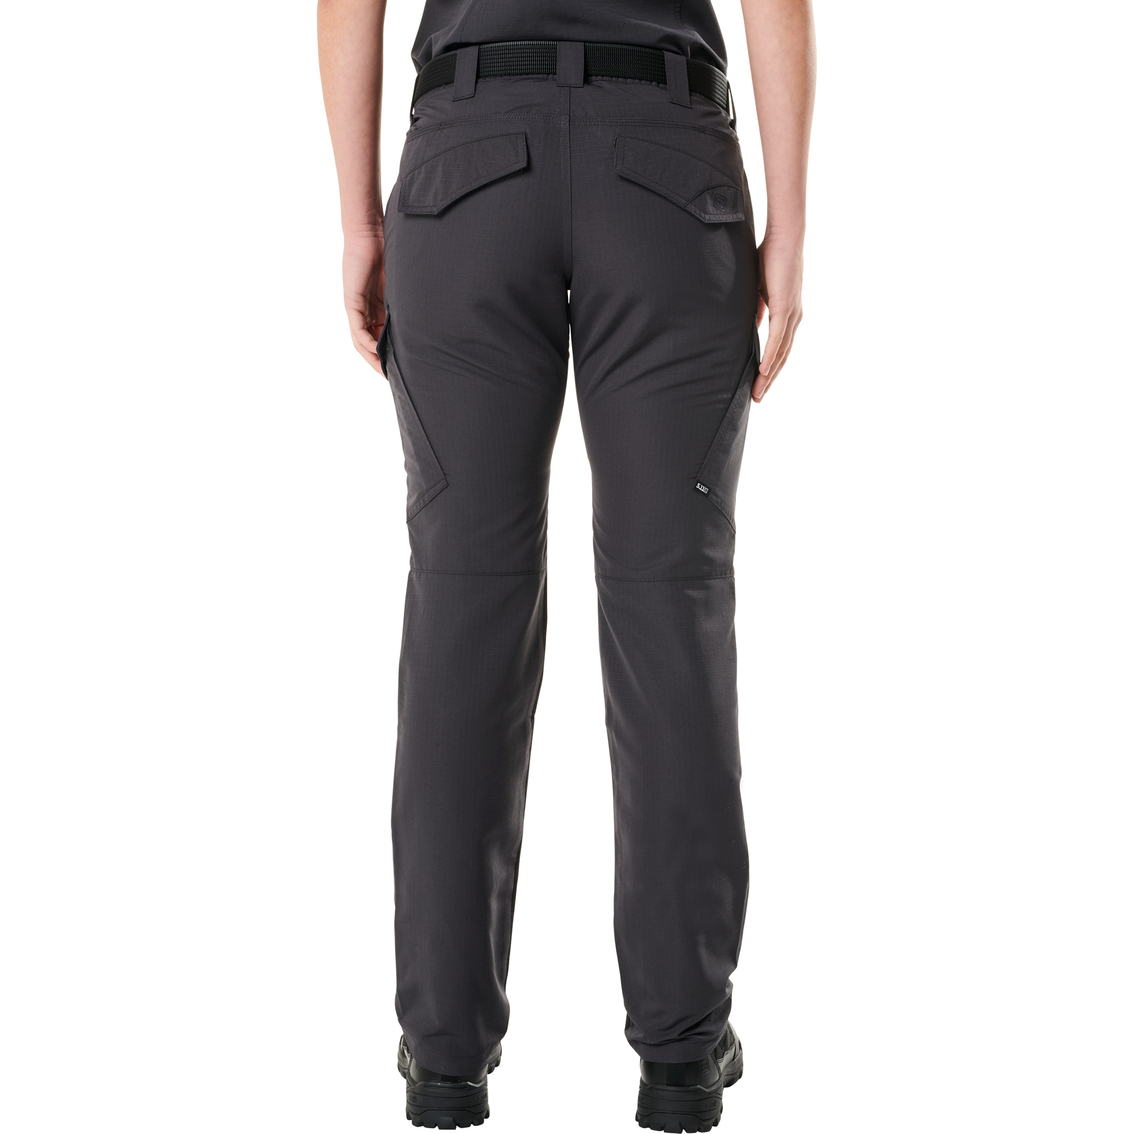 5.11 Women's Fast Tac Cargo Pants - Image 2 of 3